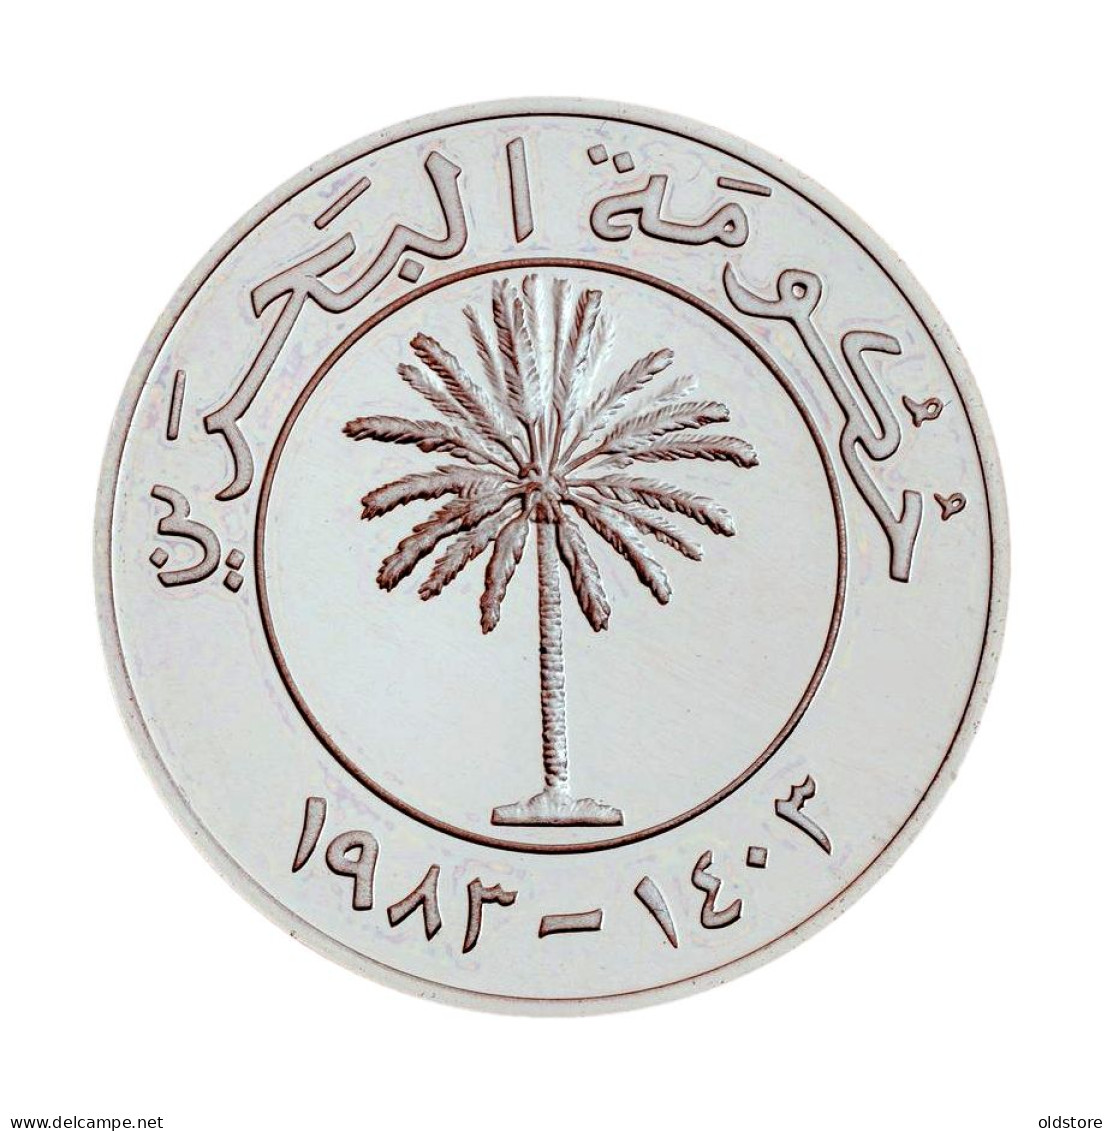 Bahrain Coins - MINT (10 Fils ) Proof  -  Sterling Silver - ND 1983 - Mint Silver Coins - Bahrein